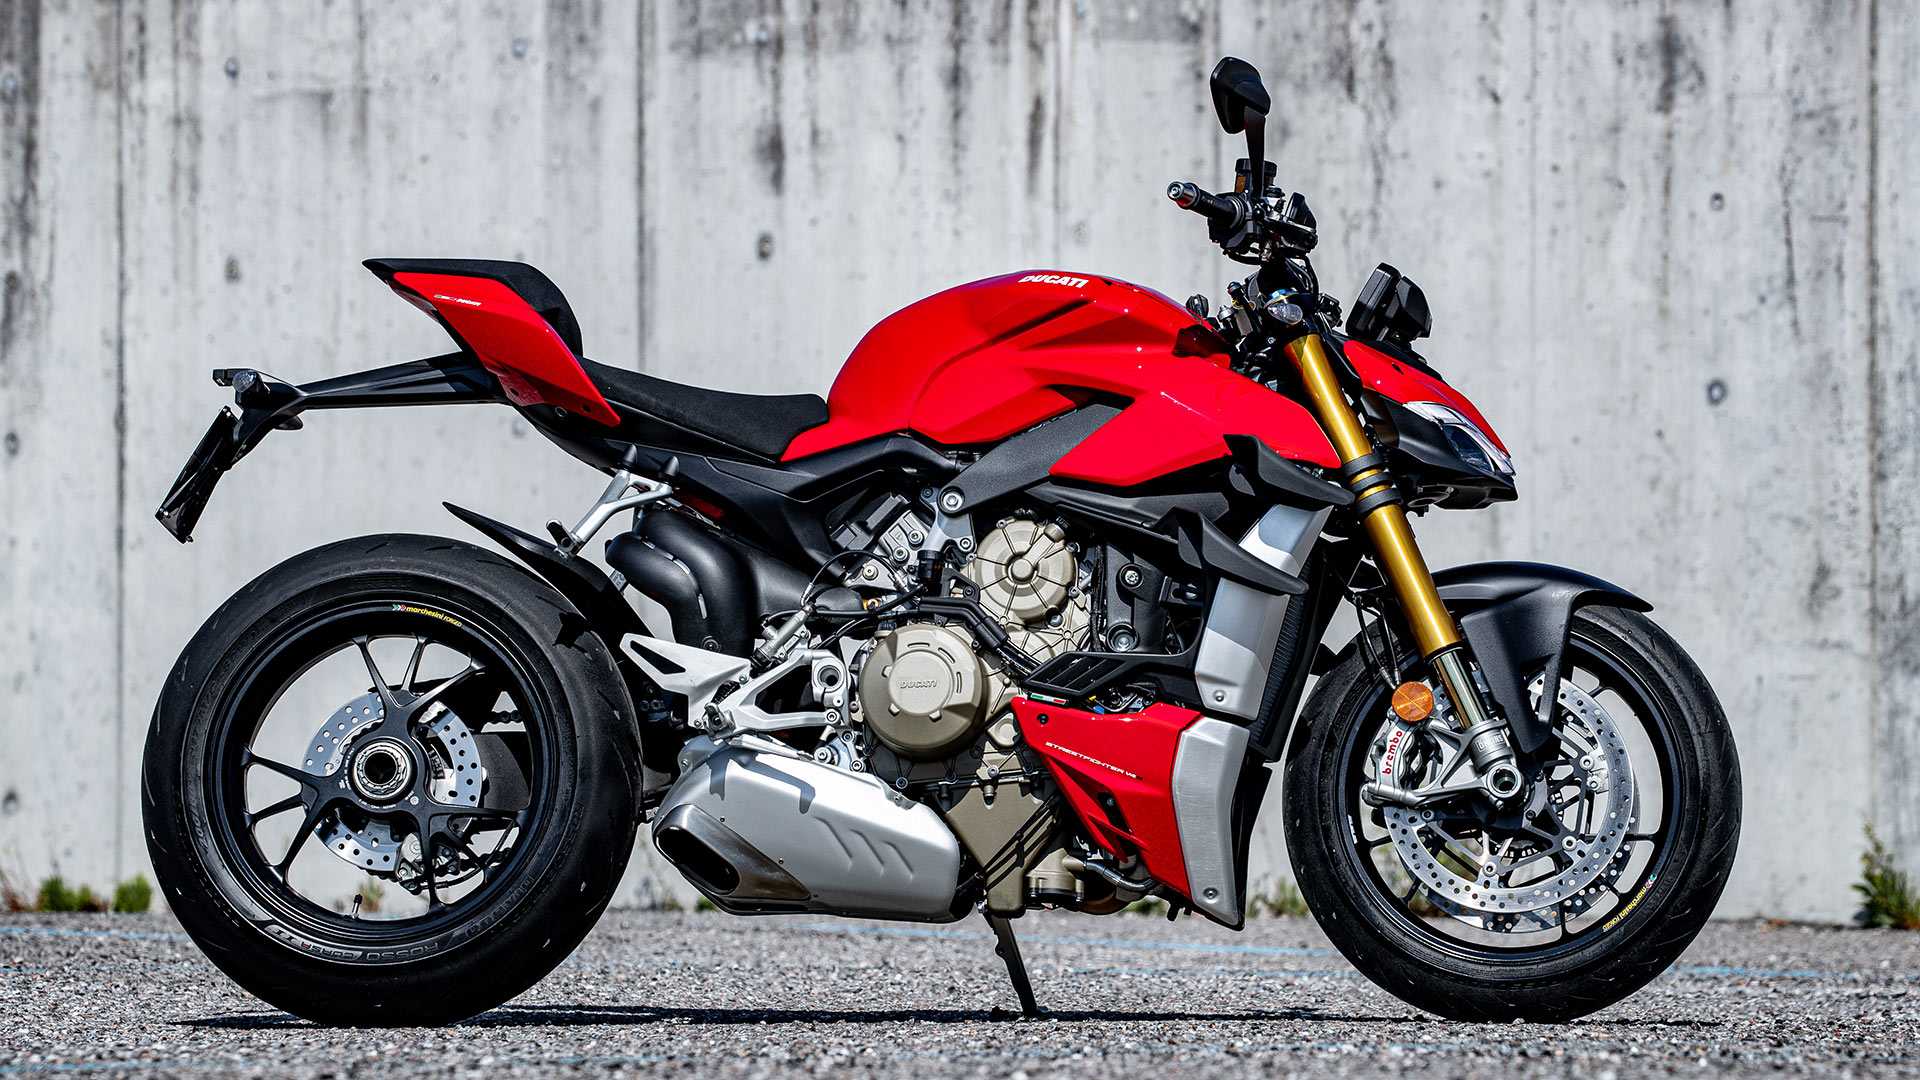 Things You Should Know About The 2020 Ducati Streetfighter V4